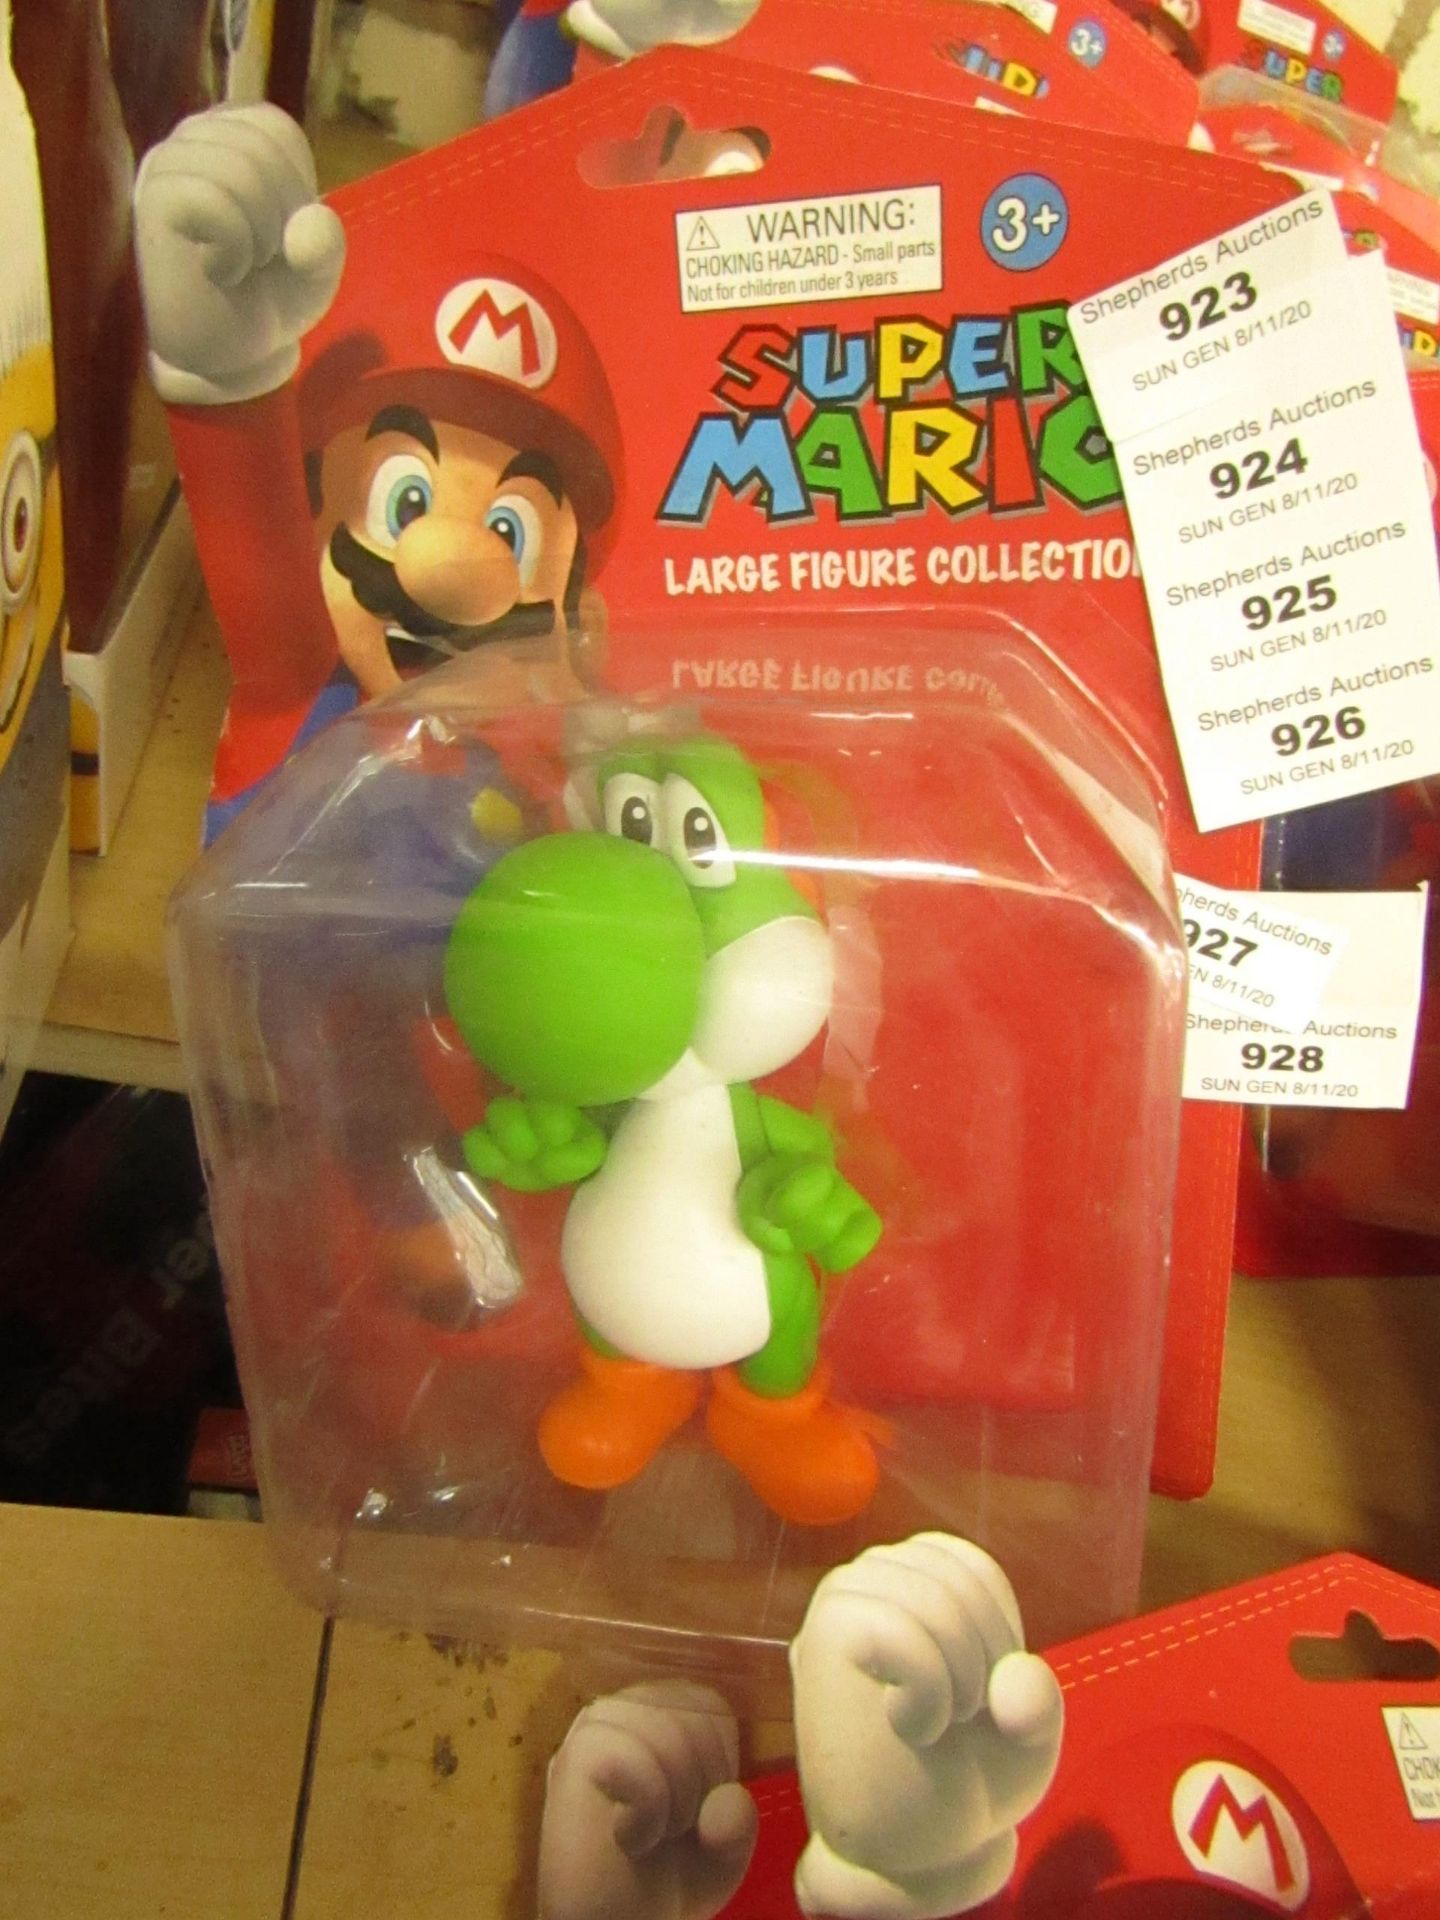 Super Mario Large Vinyl Figure. New & Packaged. See Image For Figure